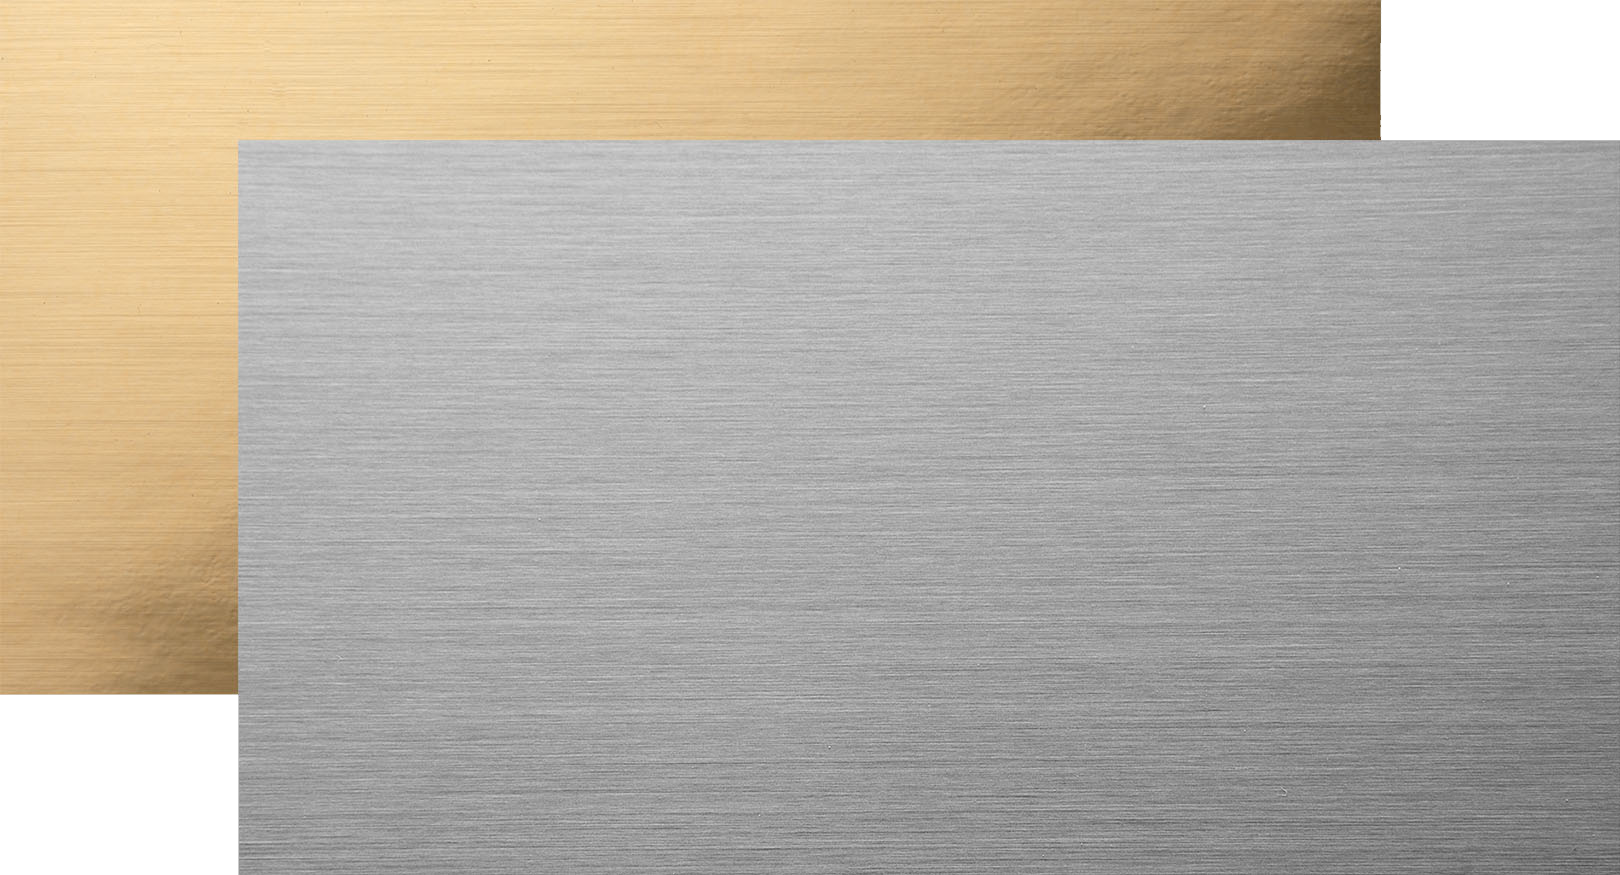 FLEXcon brushed silver and gold label material